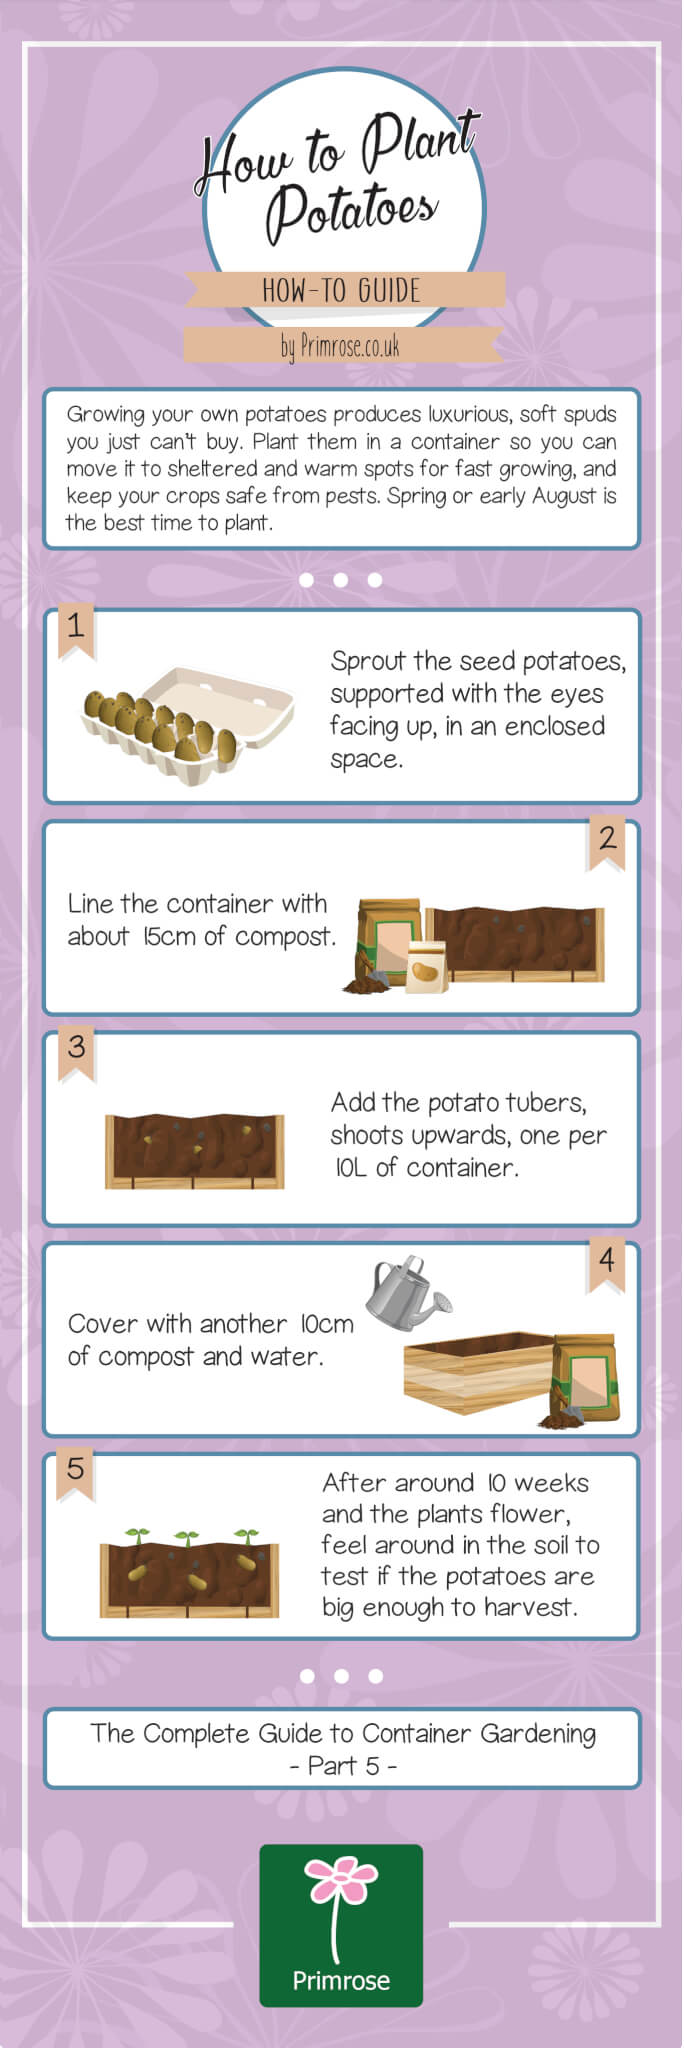 How to plant potatoes in containers infographic